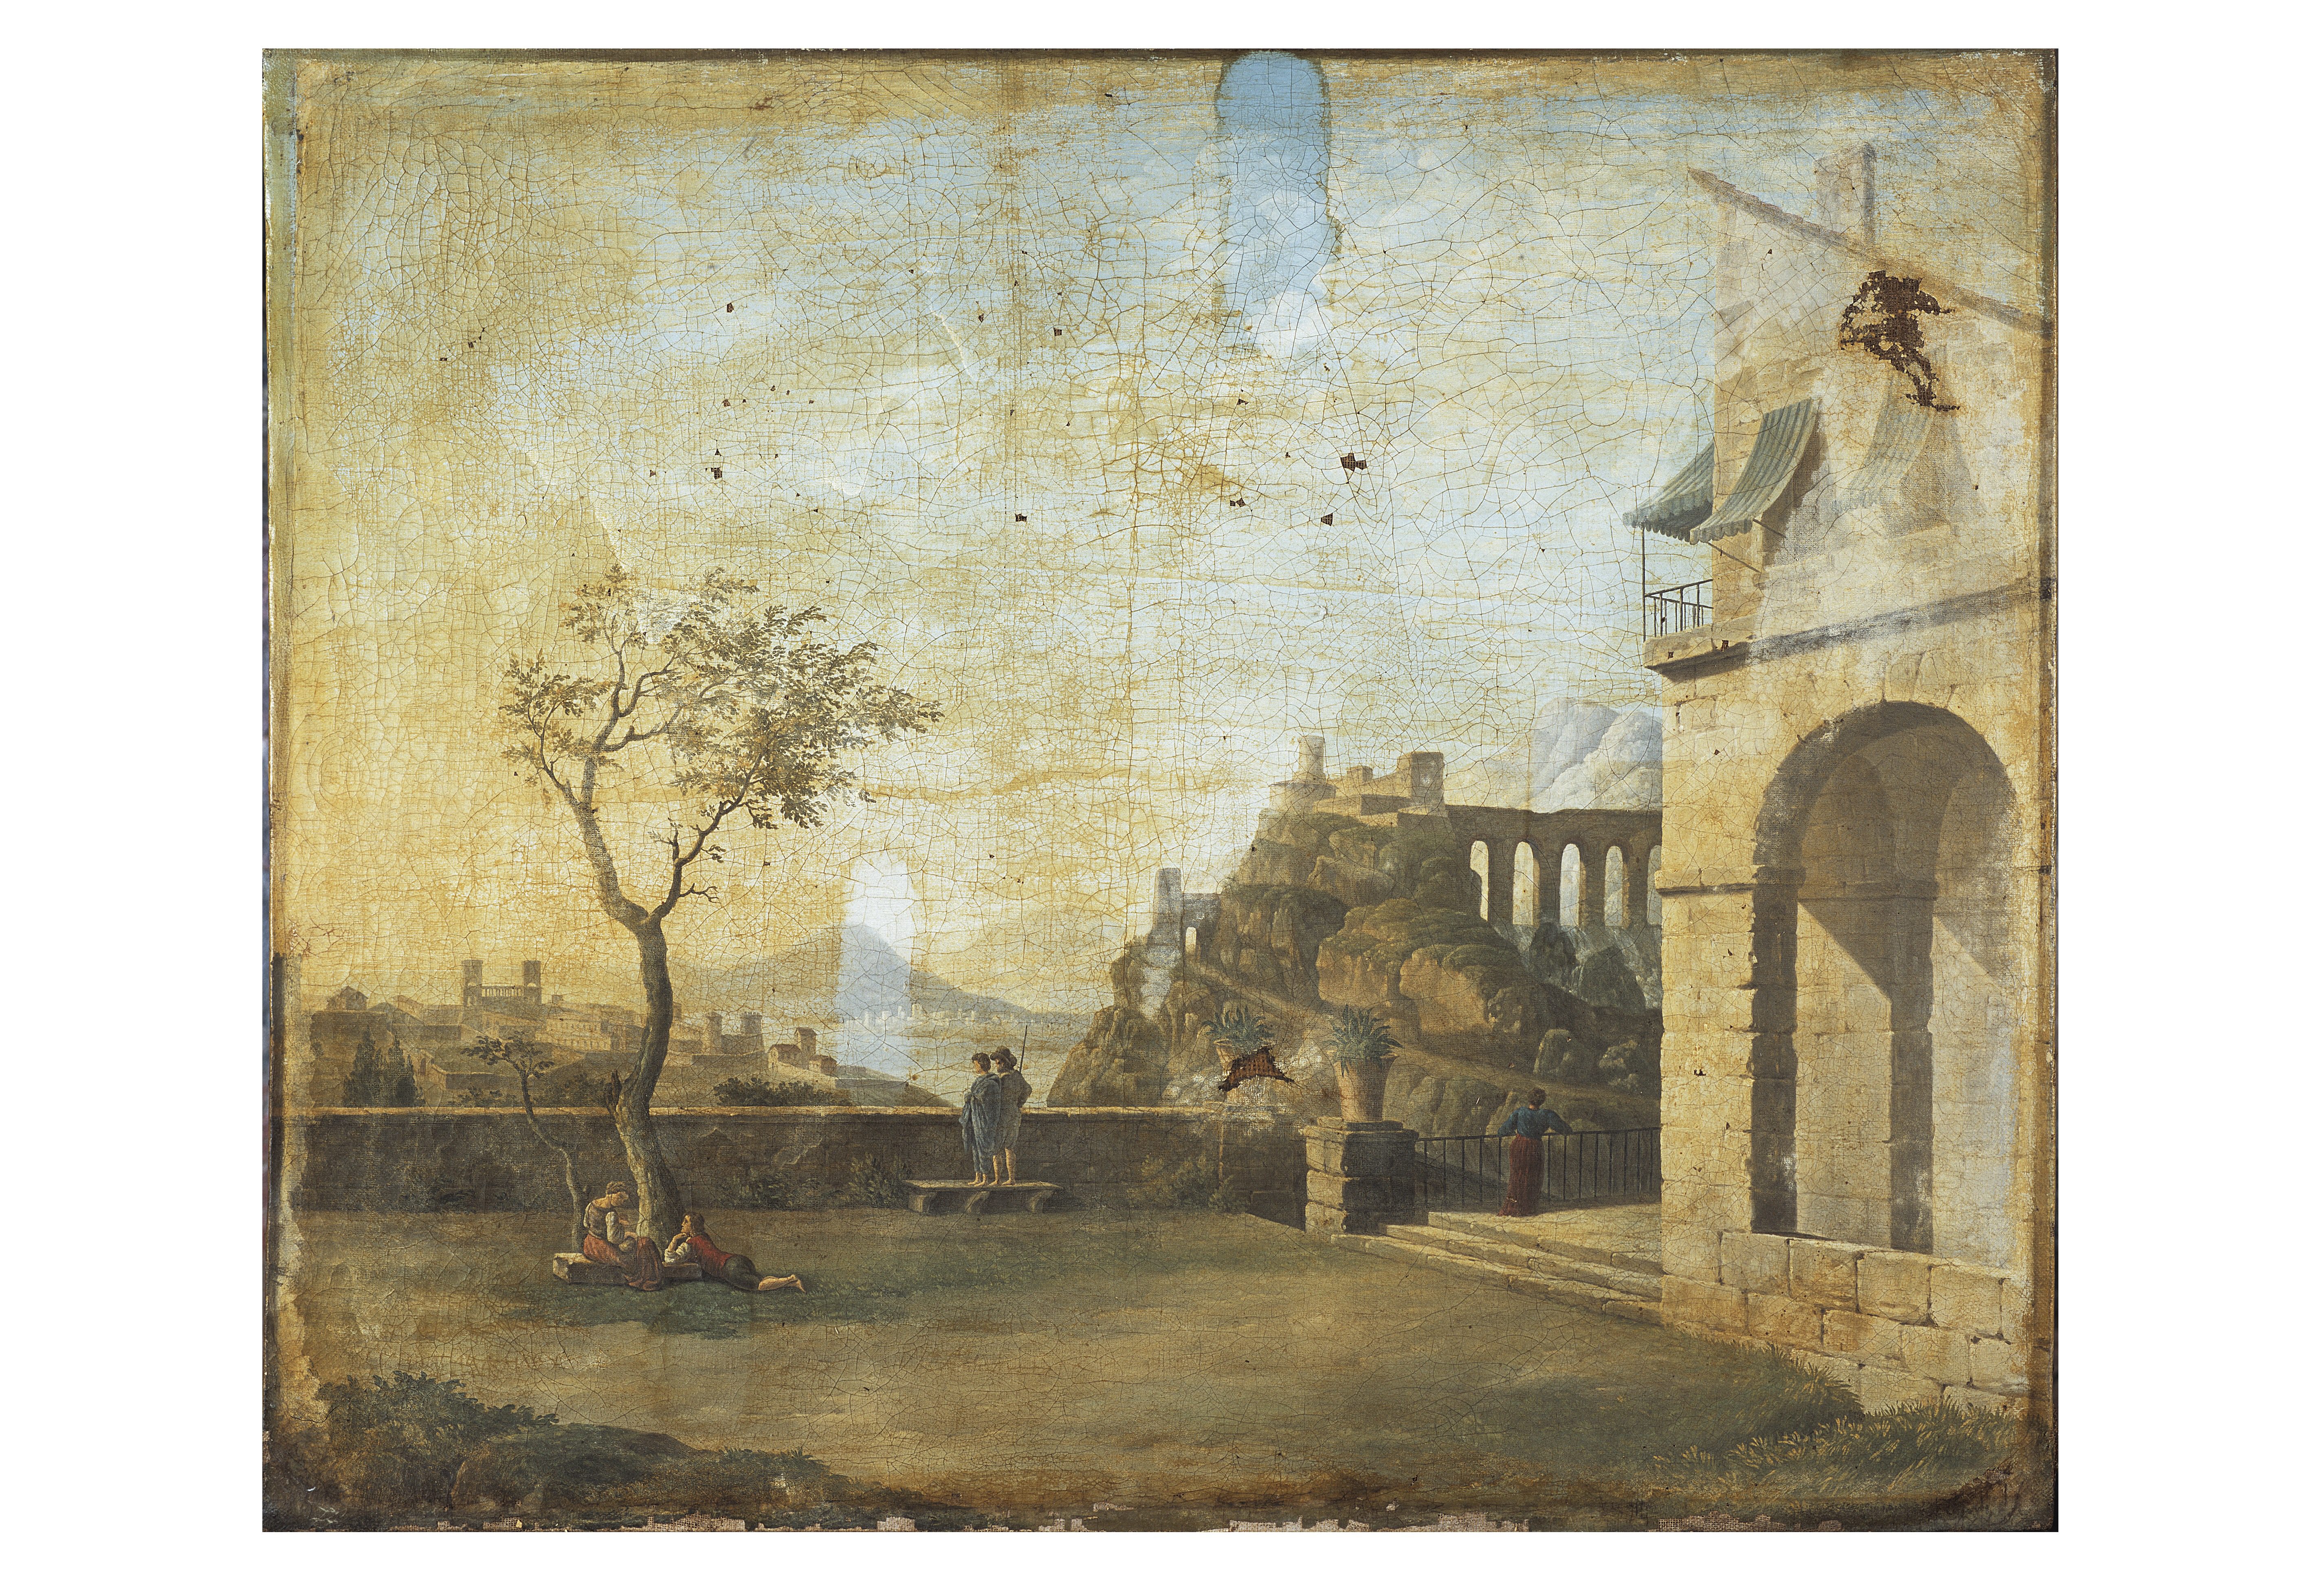 Picture of painting before conservation